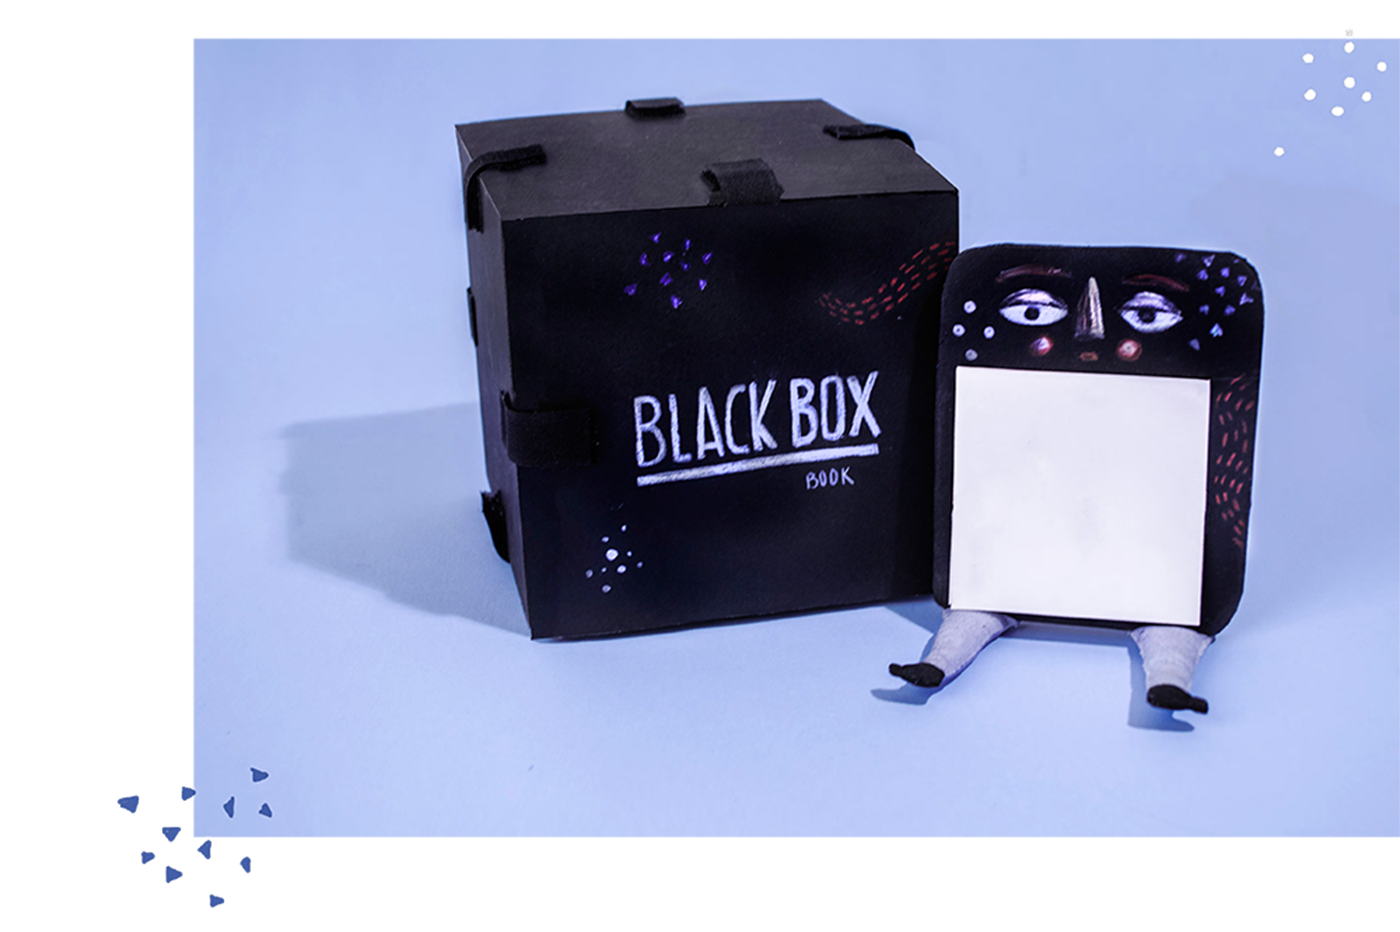 projects/-14-blackbox/images/02-blackbox.png